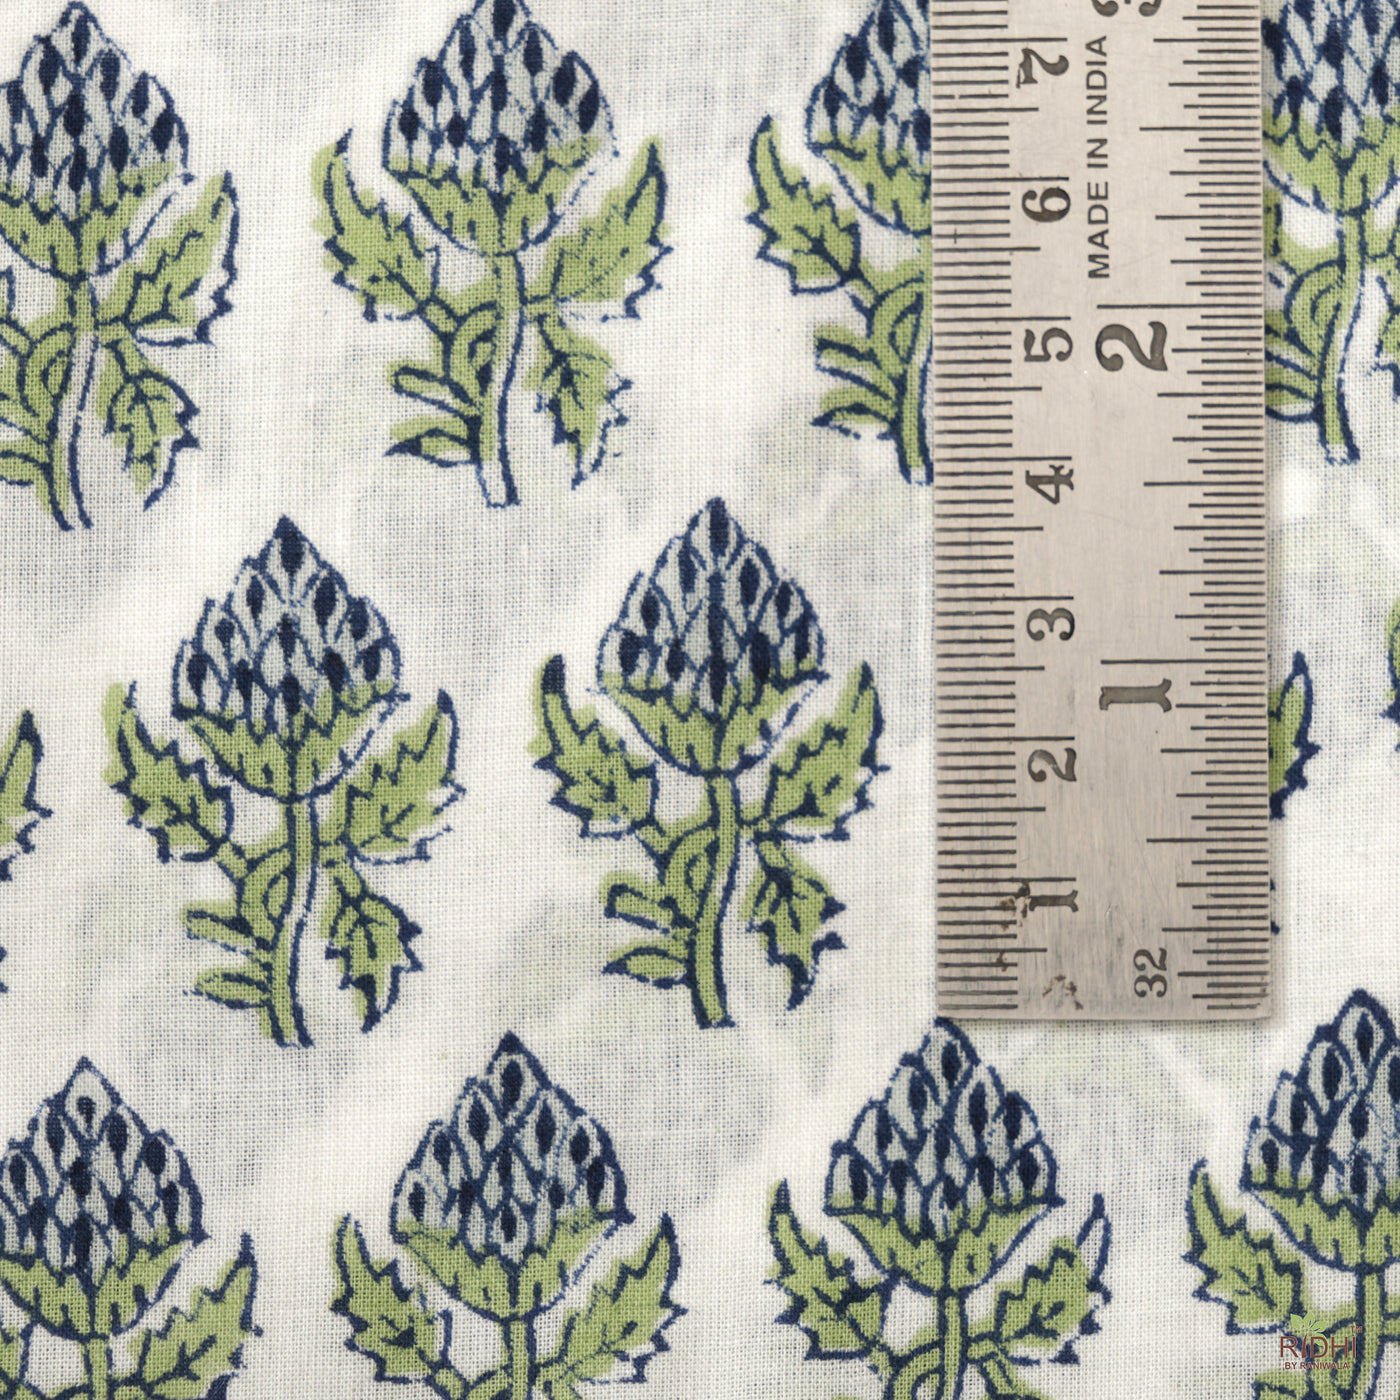 Fabricrush Airforce Blue and Oxford Blue, Fern Green Indian Hand Block Printed 100% Cotton Cloth Fabric for Making Dresss Tablecloth Runner Cushion Cover Mats